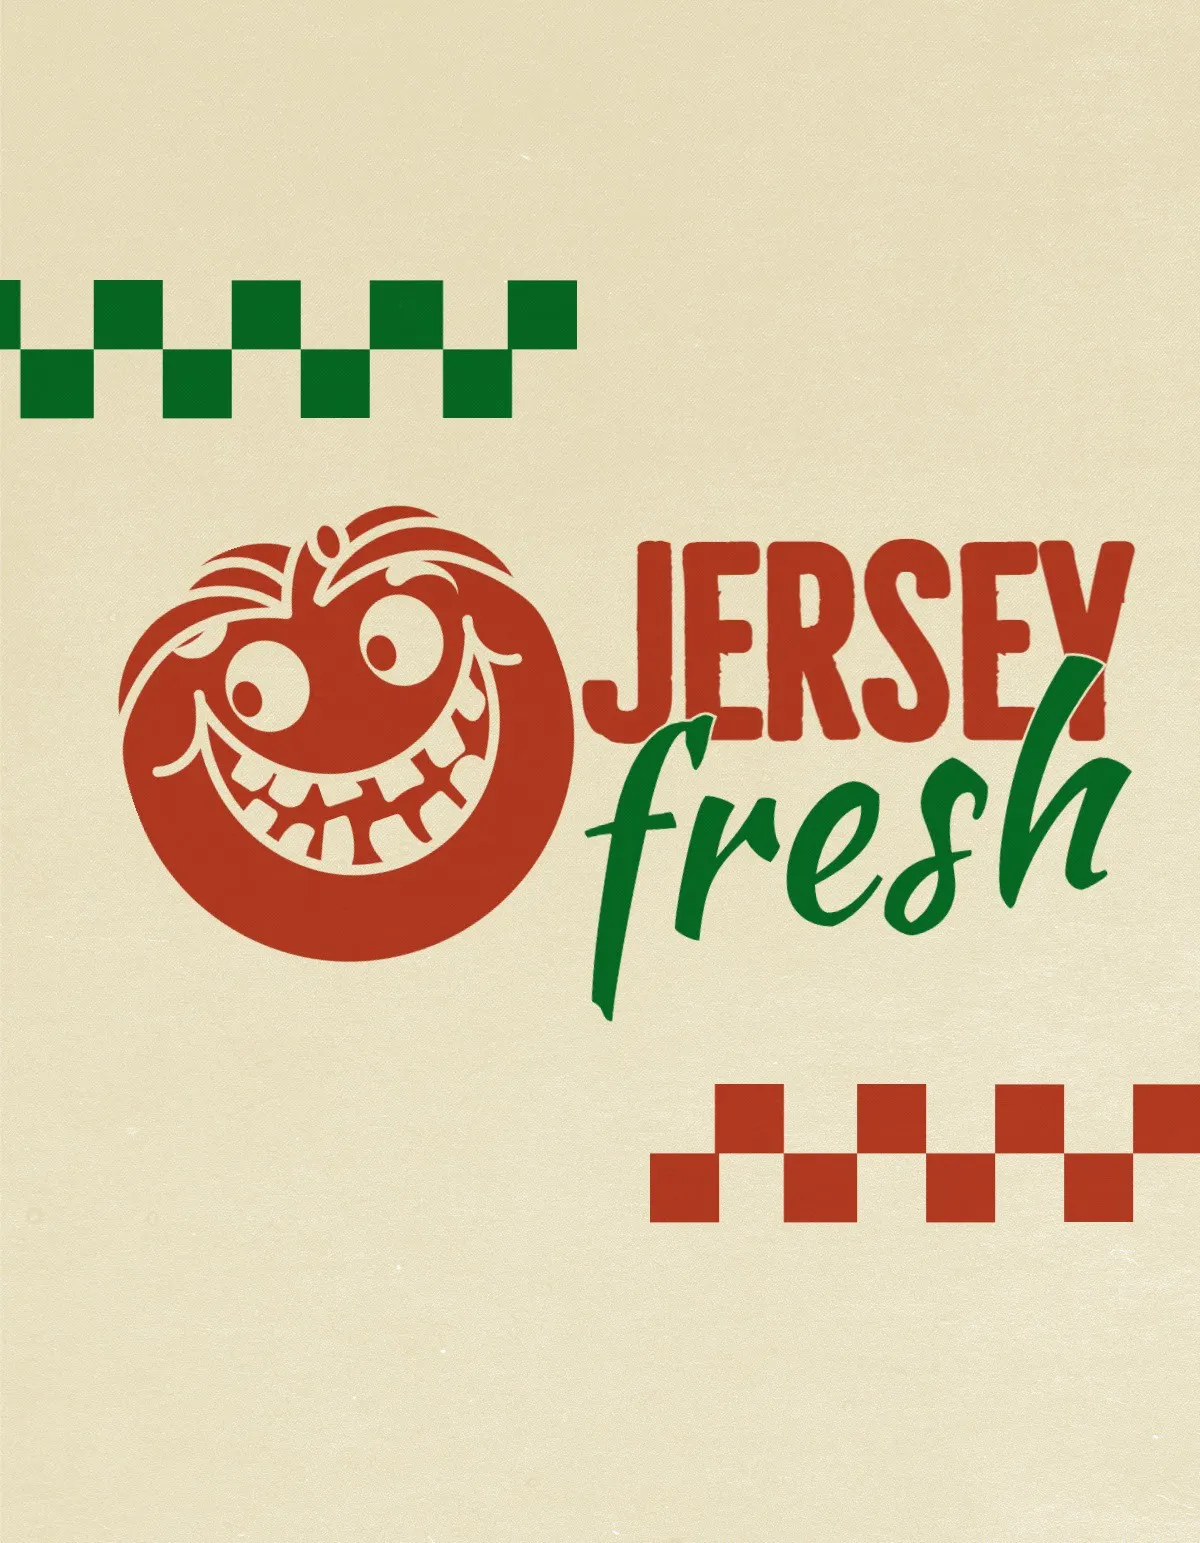 green and red retro t-shirt logo